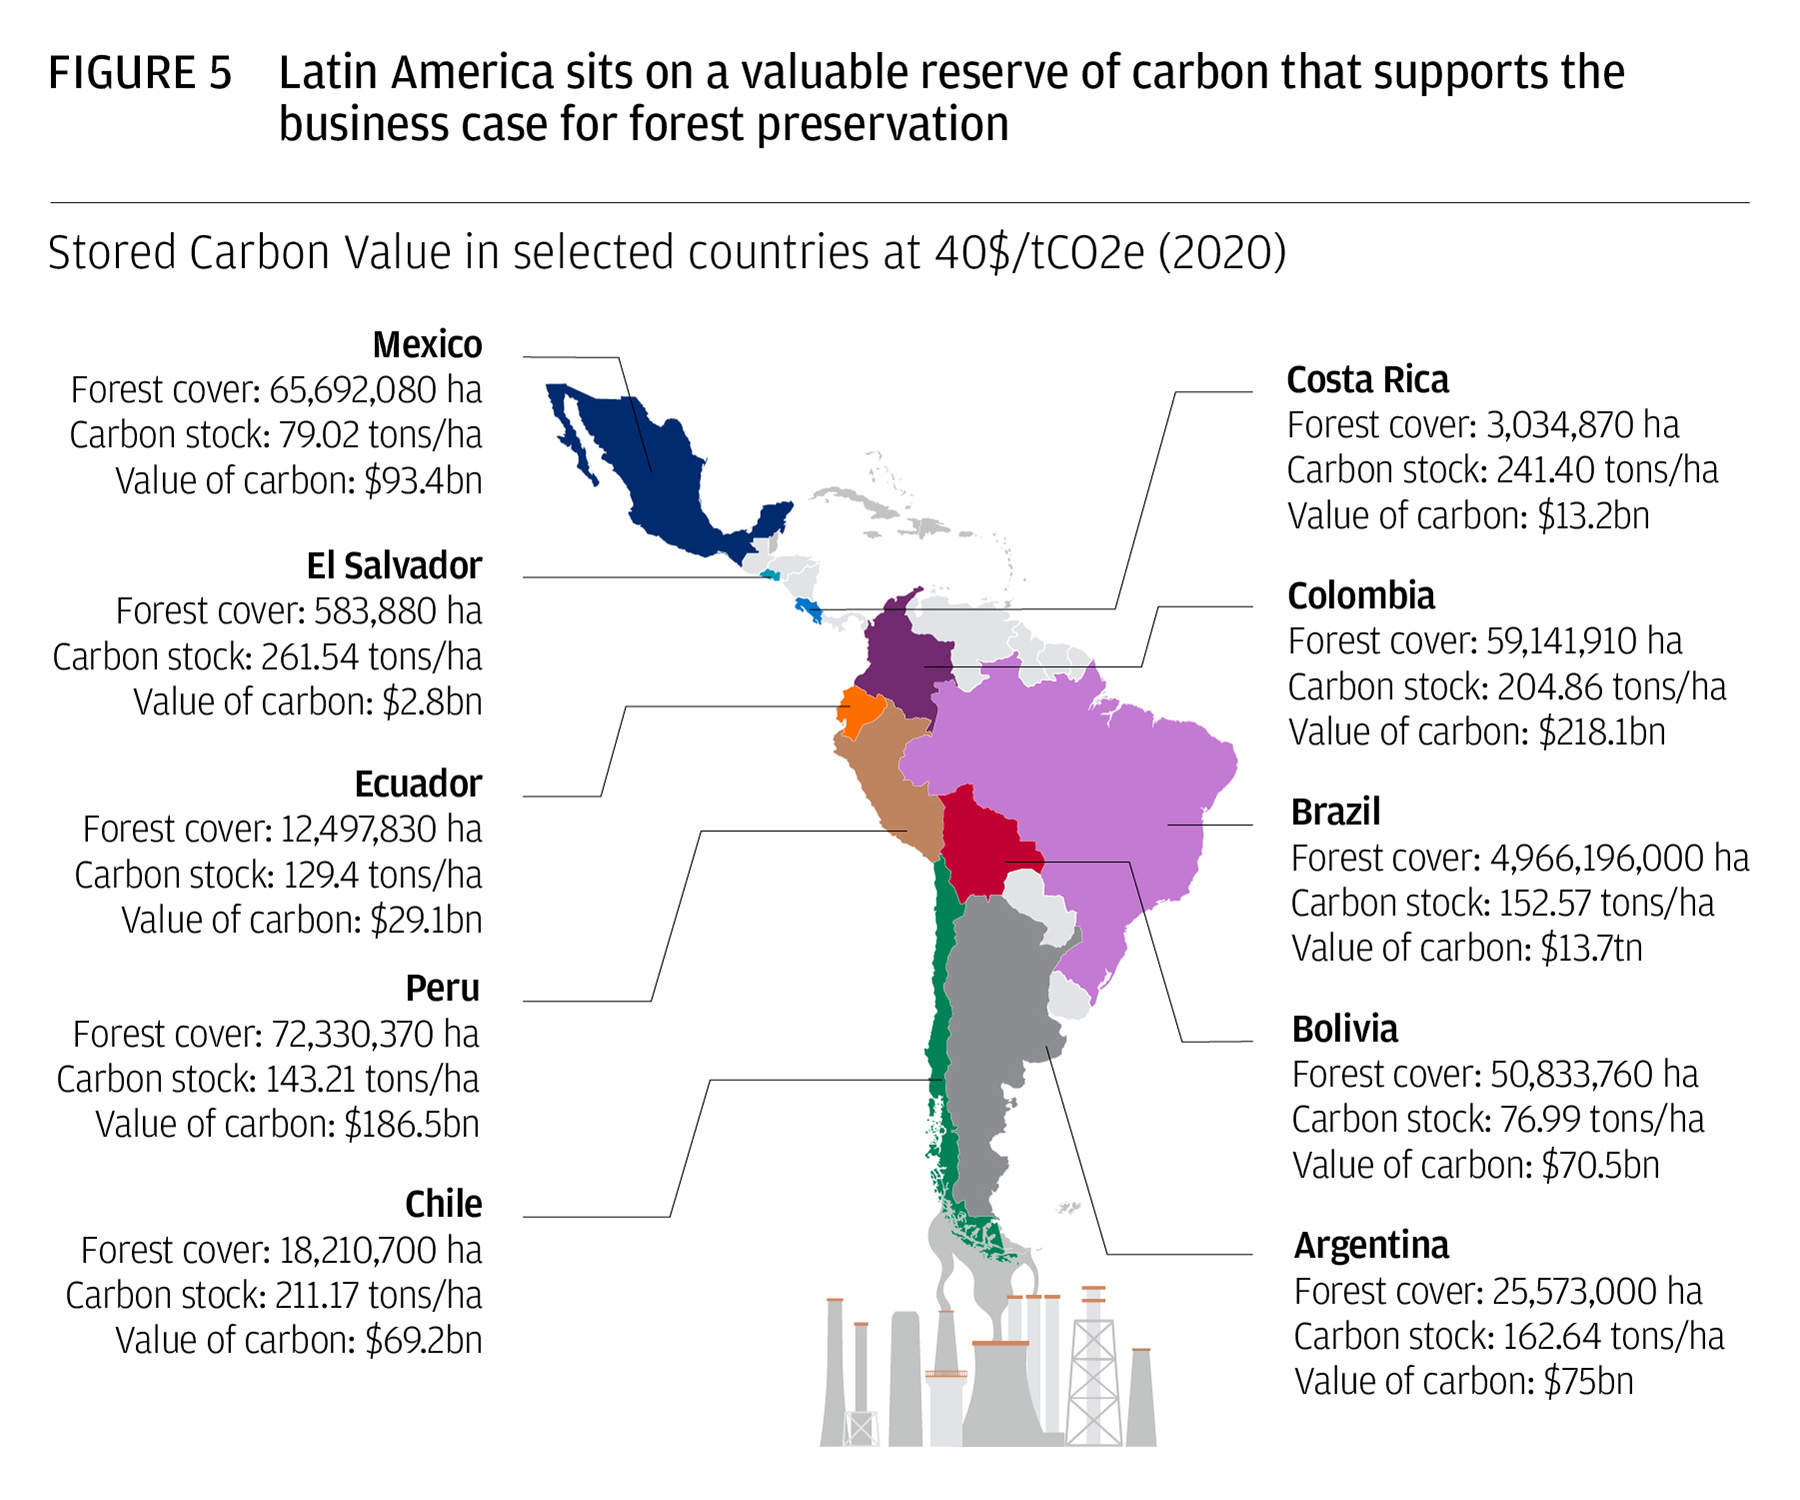 Figure 5 depicts the stored carbon value in selected Latin American countries at $40 per ton of CO2 emissions in 2020. 